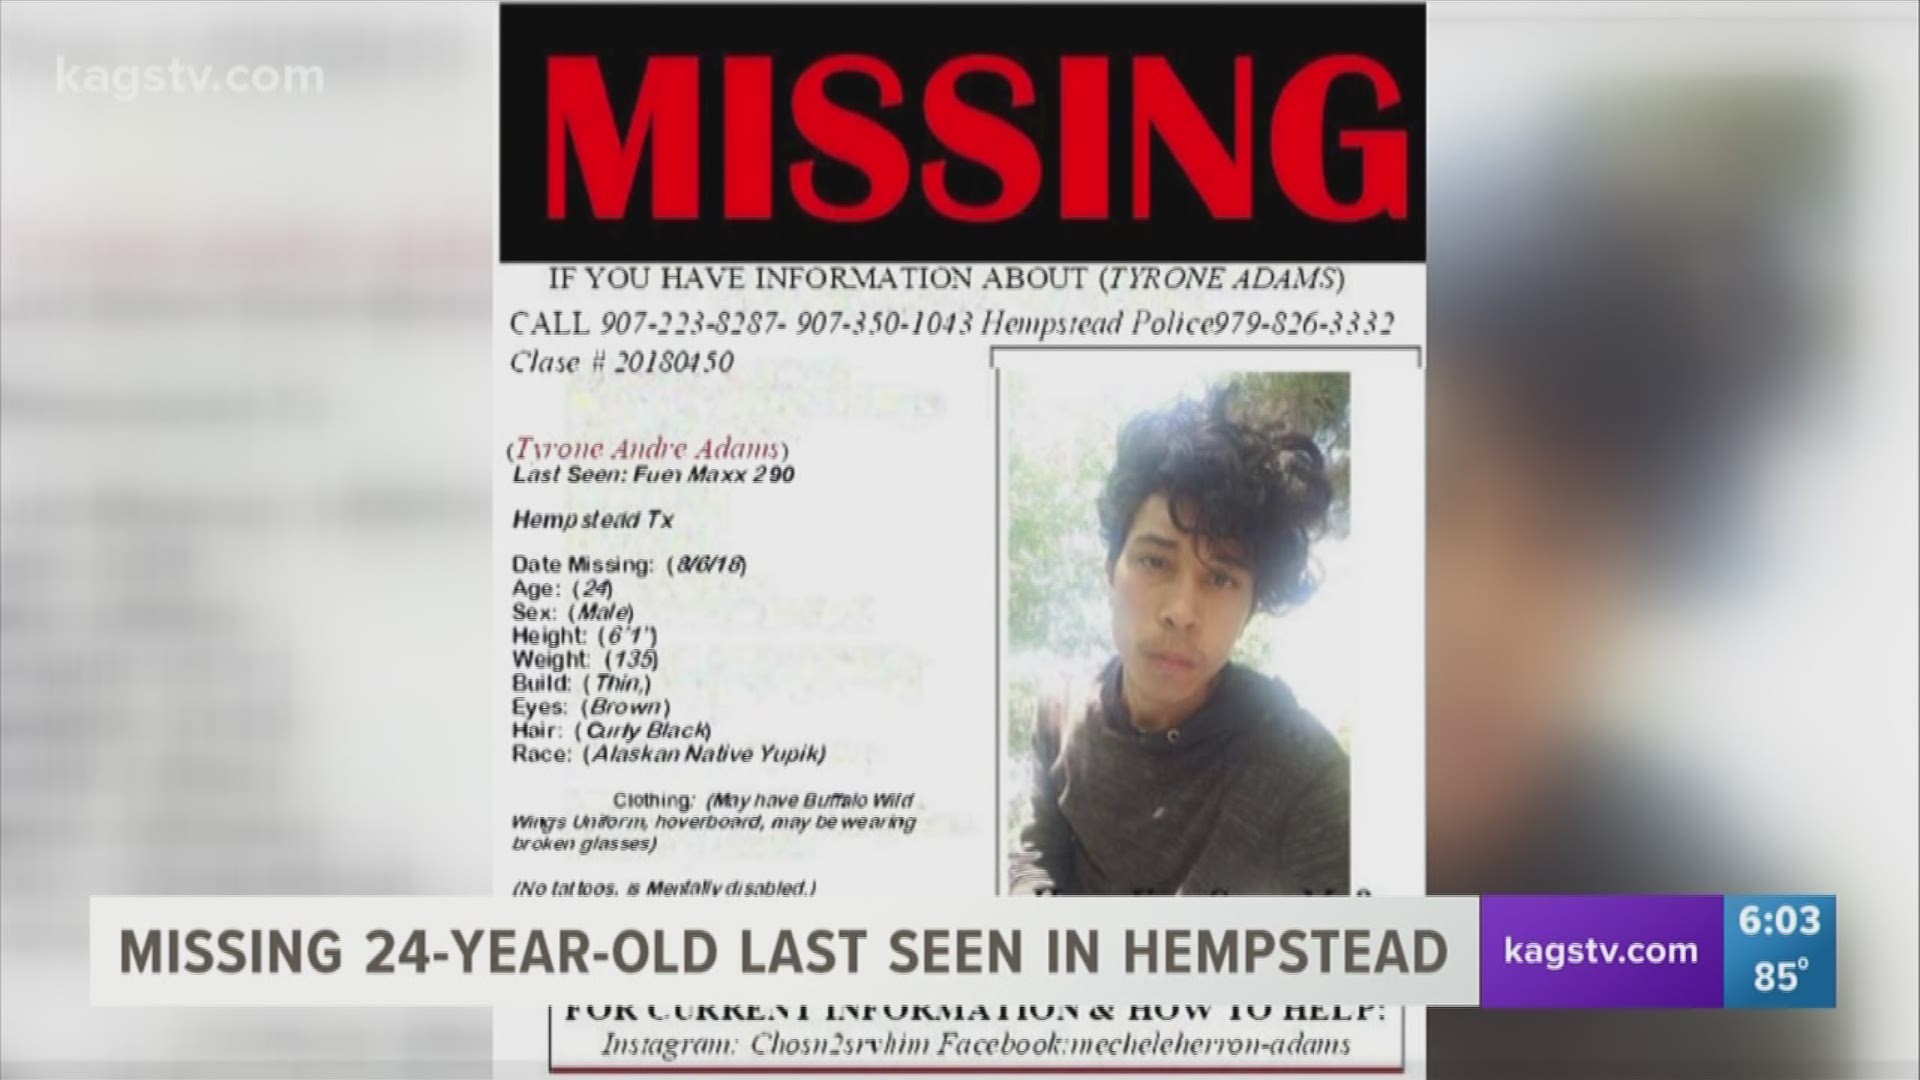 Police are still looking for a young man last seen over a month ago in Hempstead.